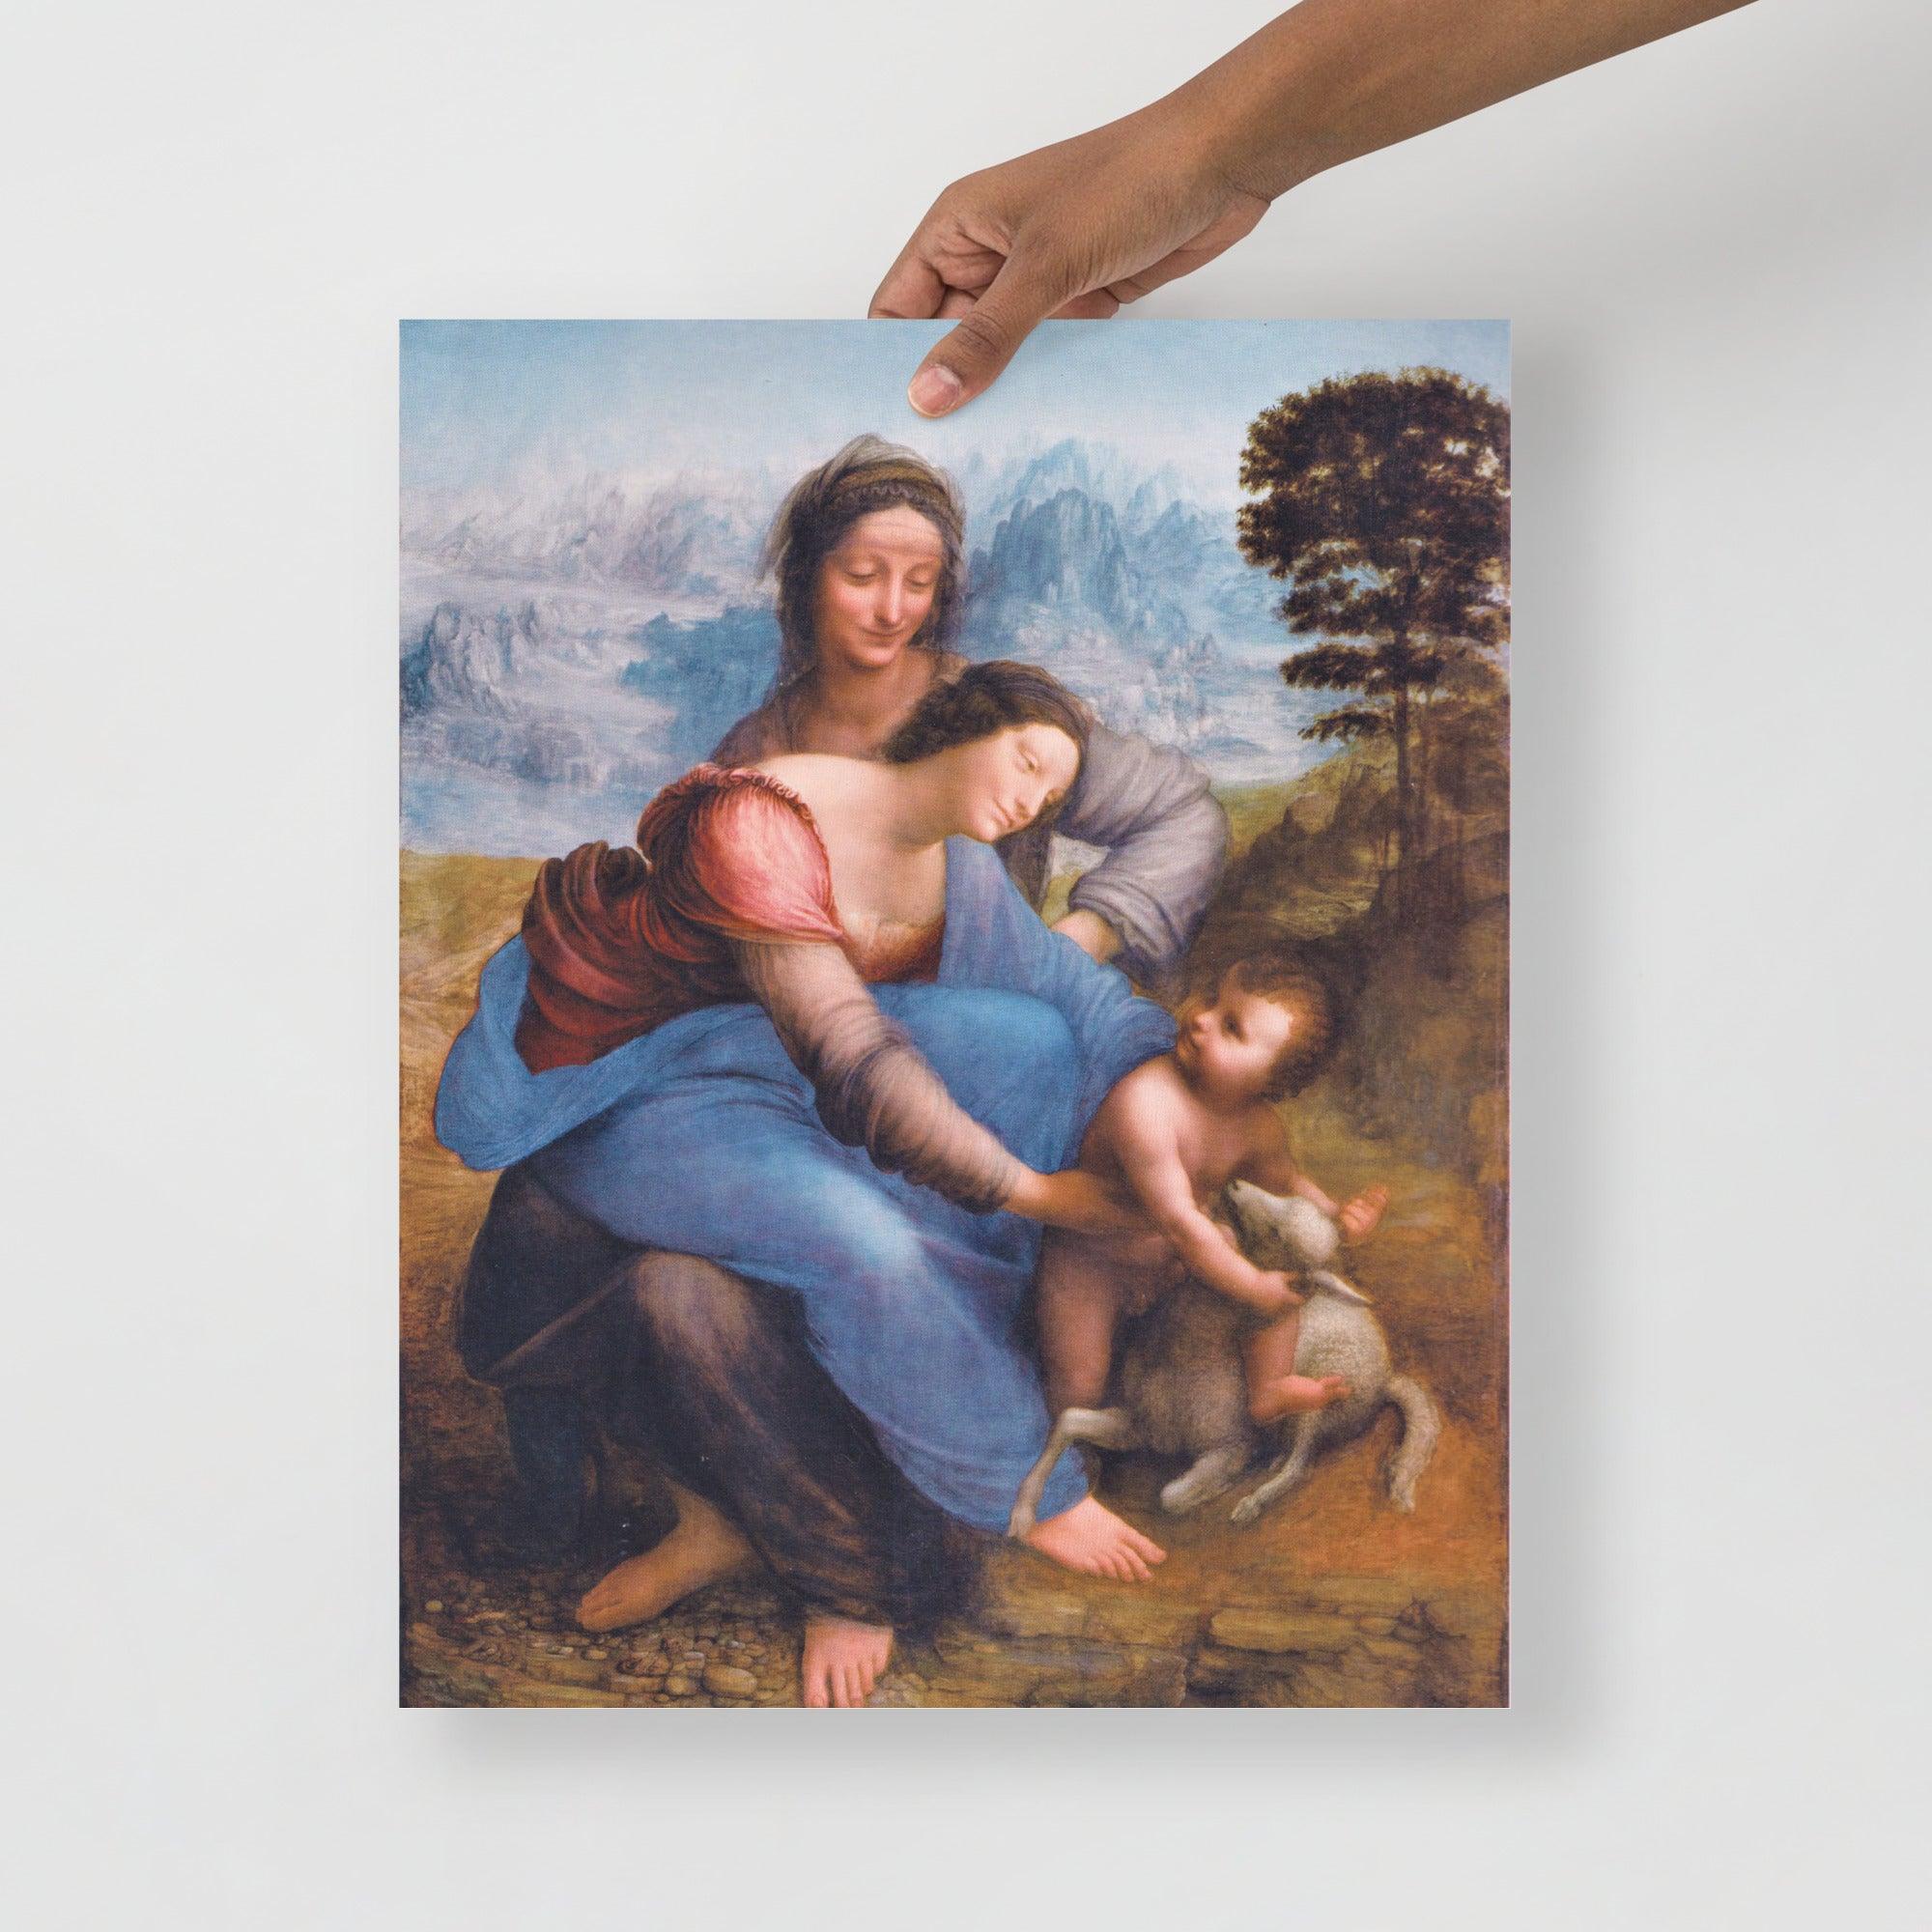 The Virgin and Child with Saint Anne by Leonardo da Vinci poster on a plain backdrop in size 16x20”.